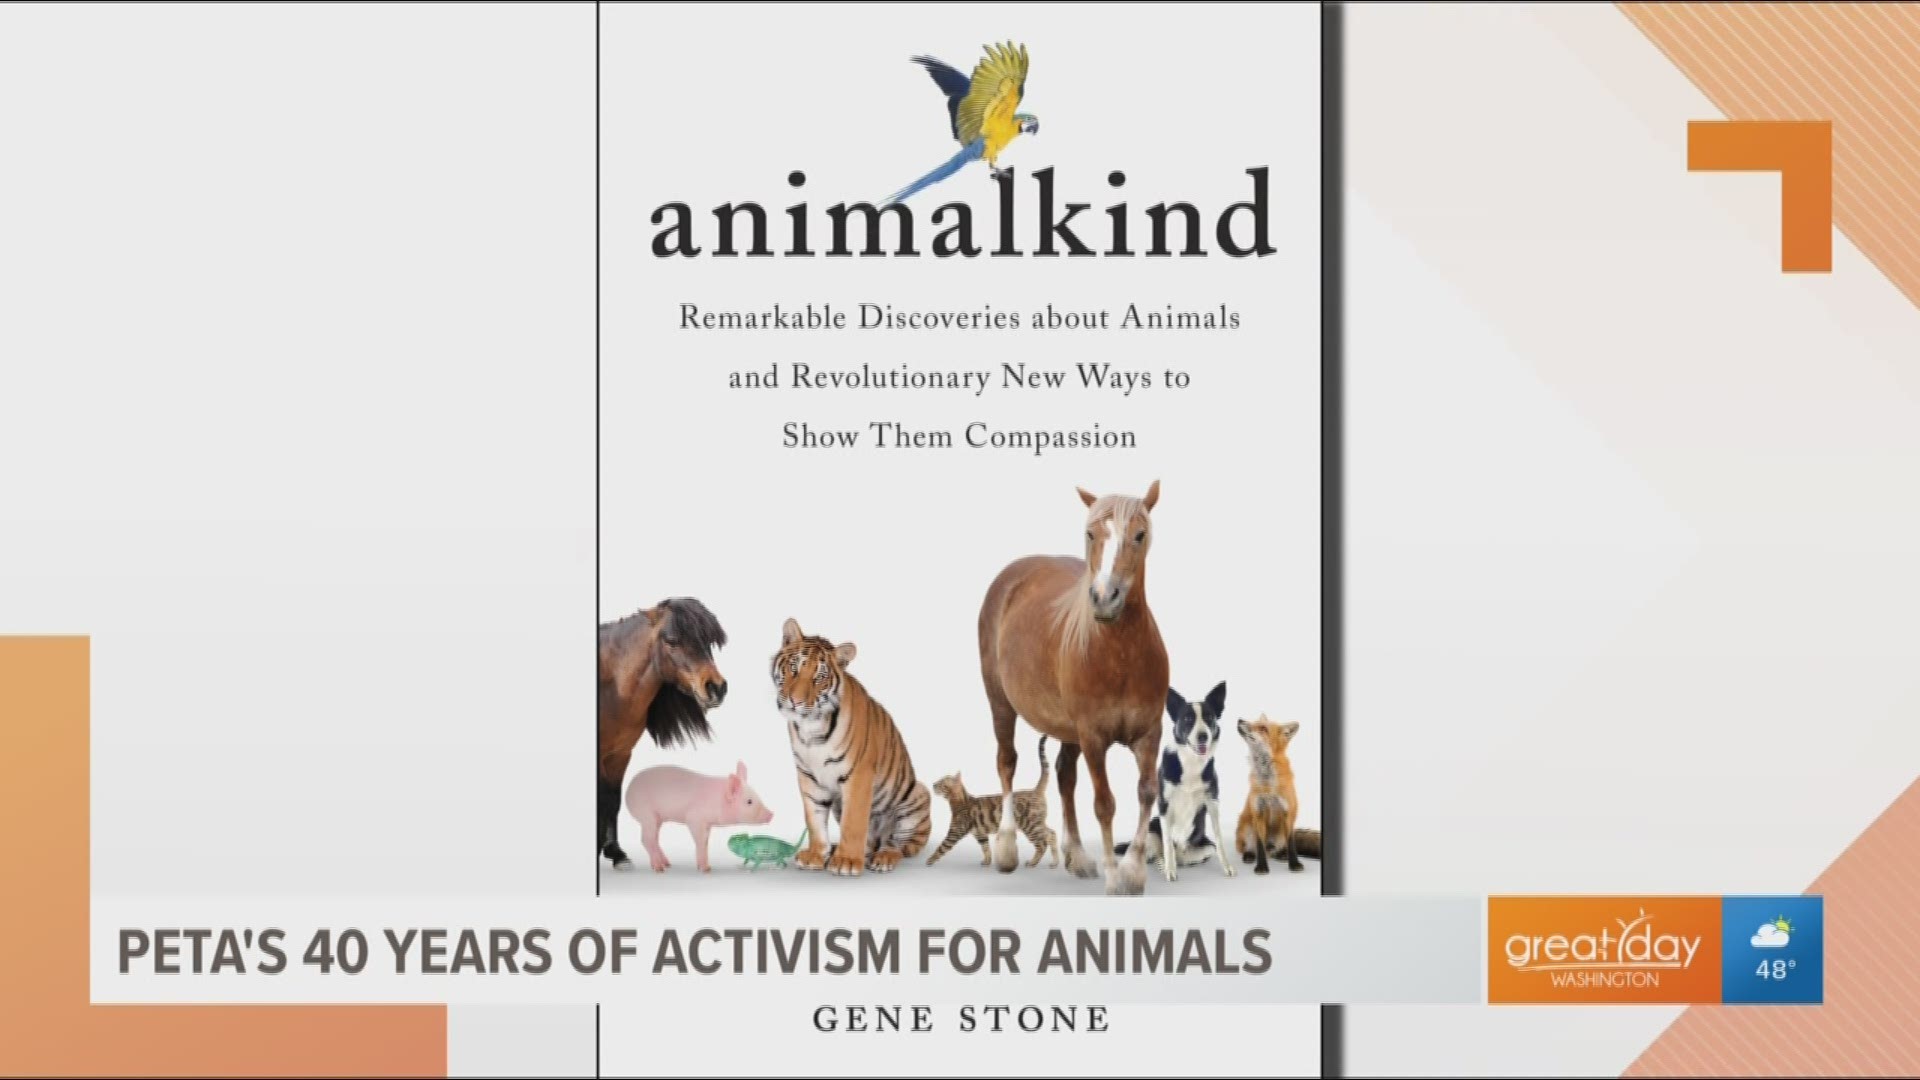 PETA Founder Ingrid Newkirk's new book, Animalkind sparks new conversations about today's headline making trends and issues. PETA celebrates 40 years in March 2020.